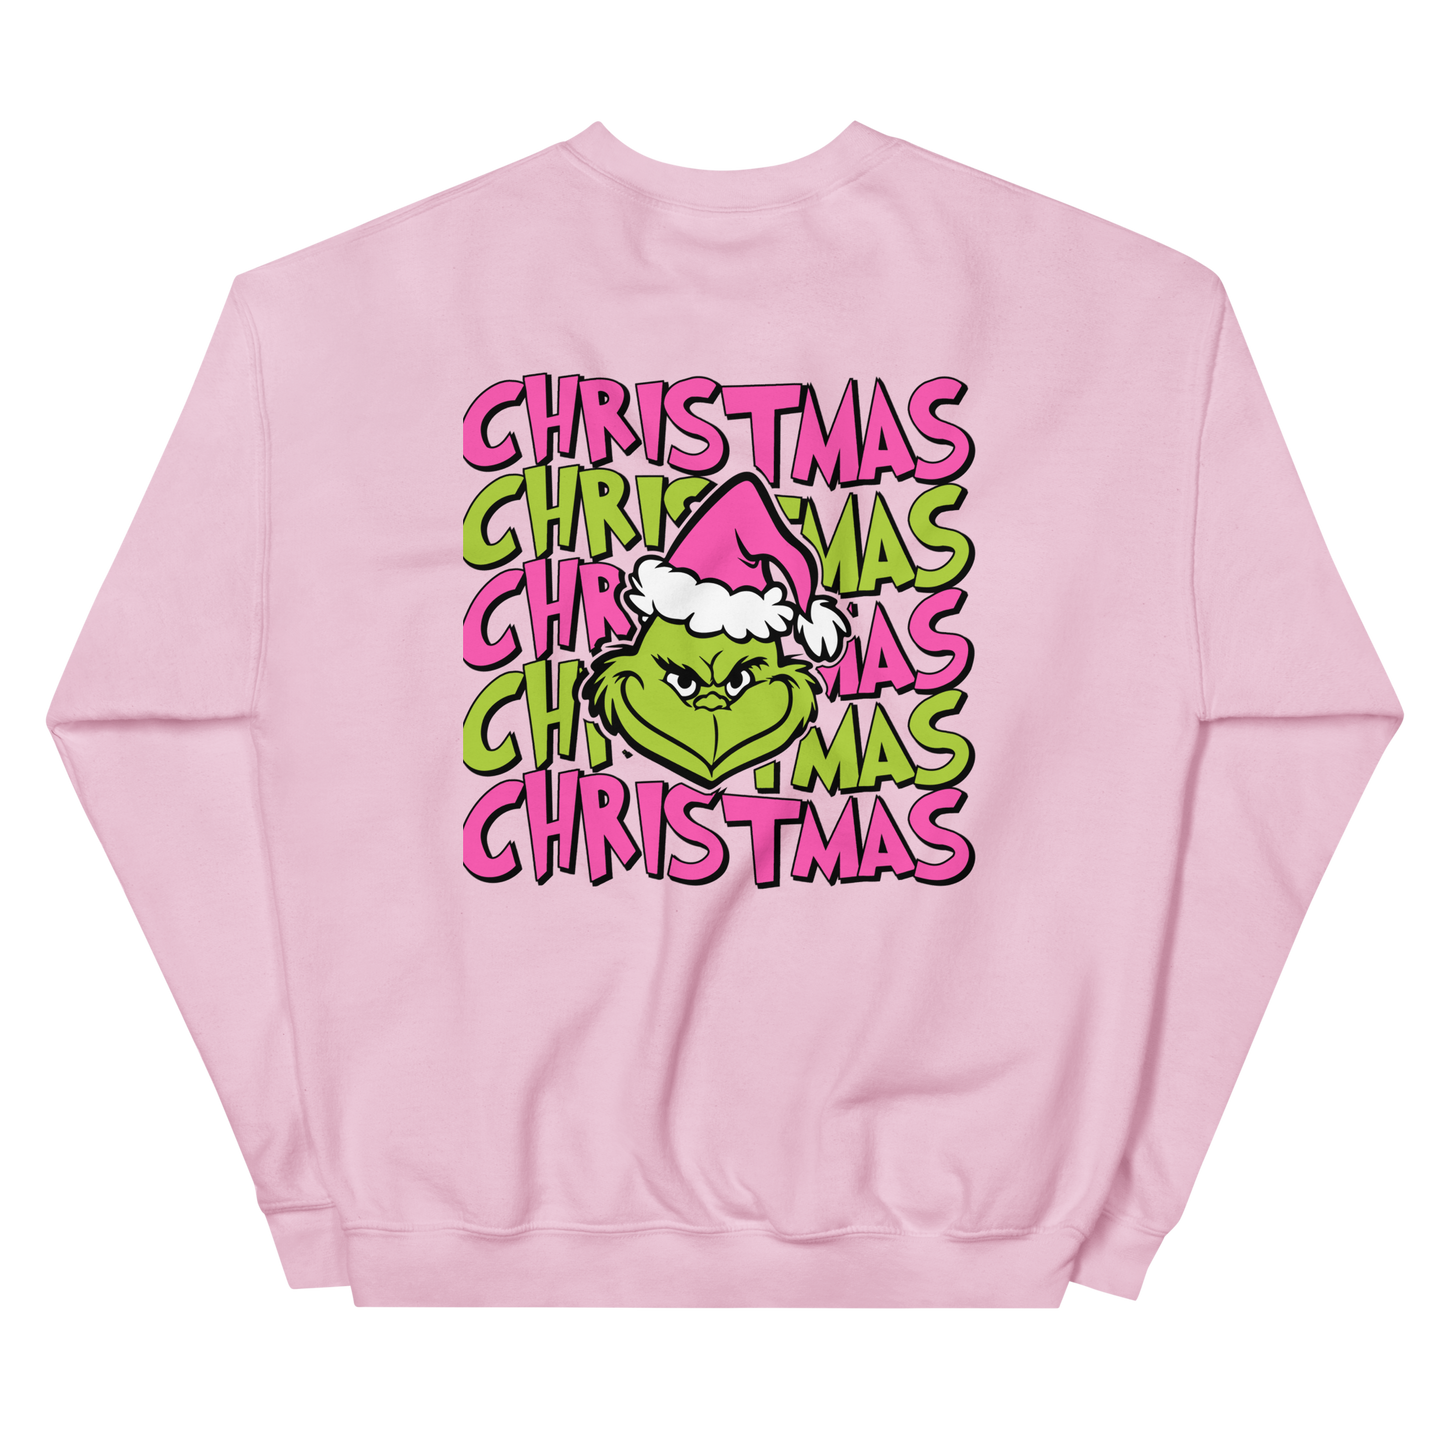 WHOVILLE FRONT & BACK CREW NECK YOUTH